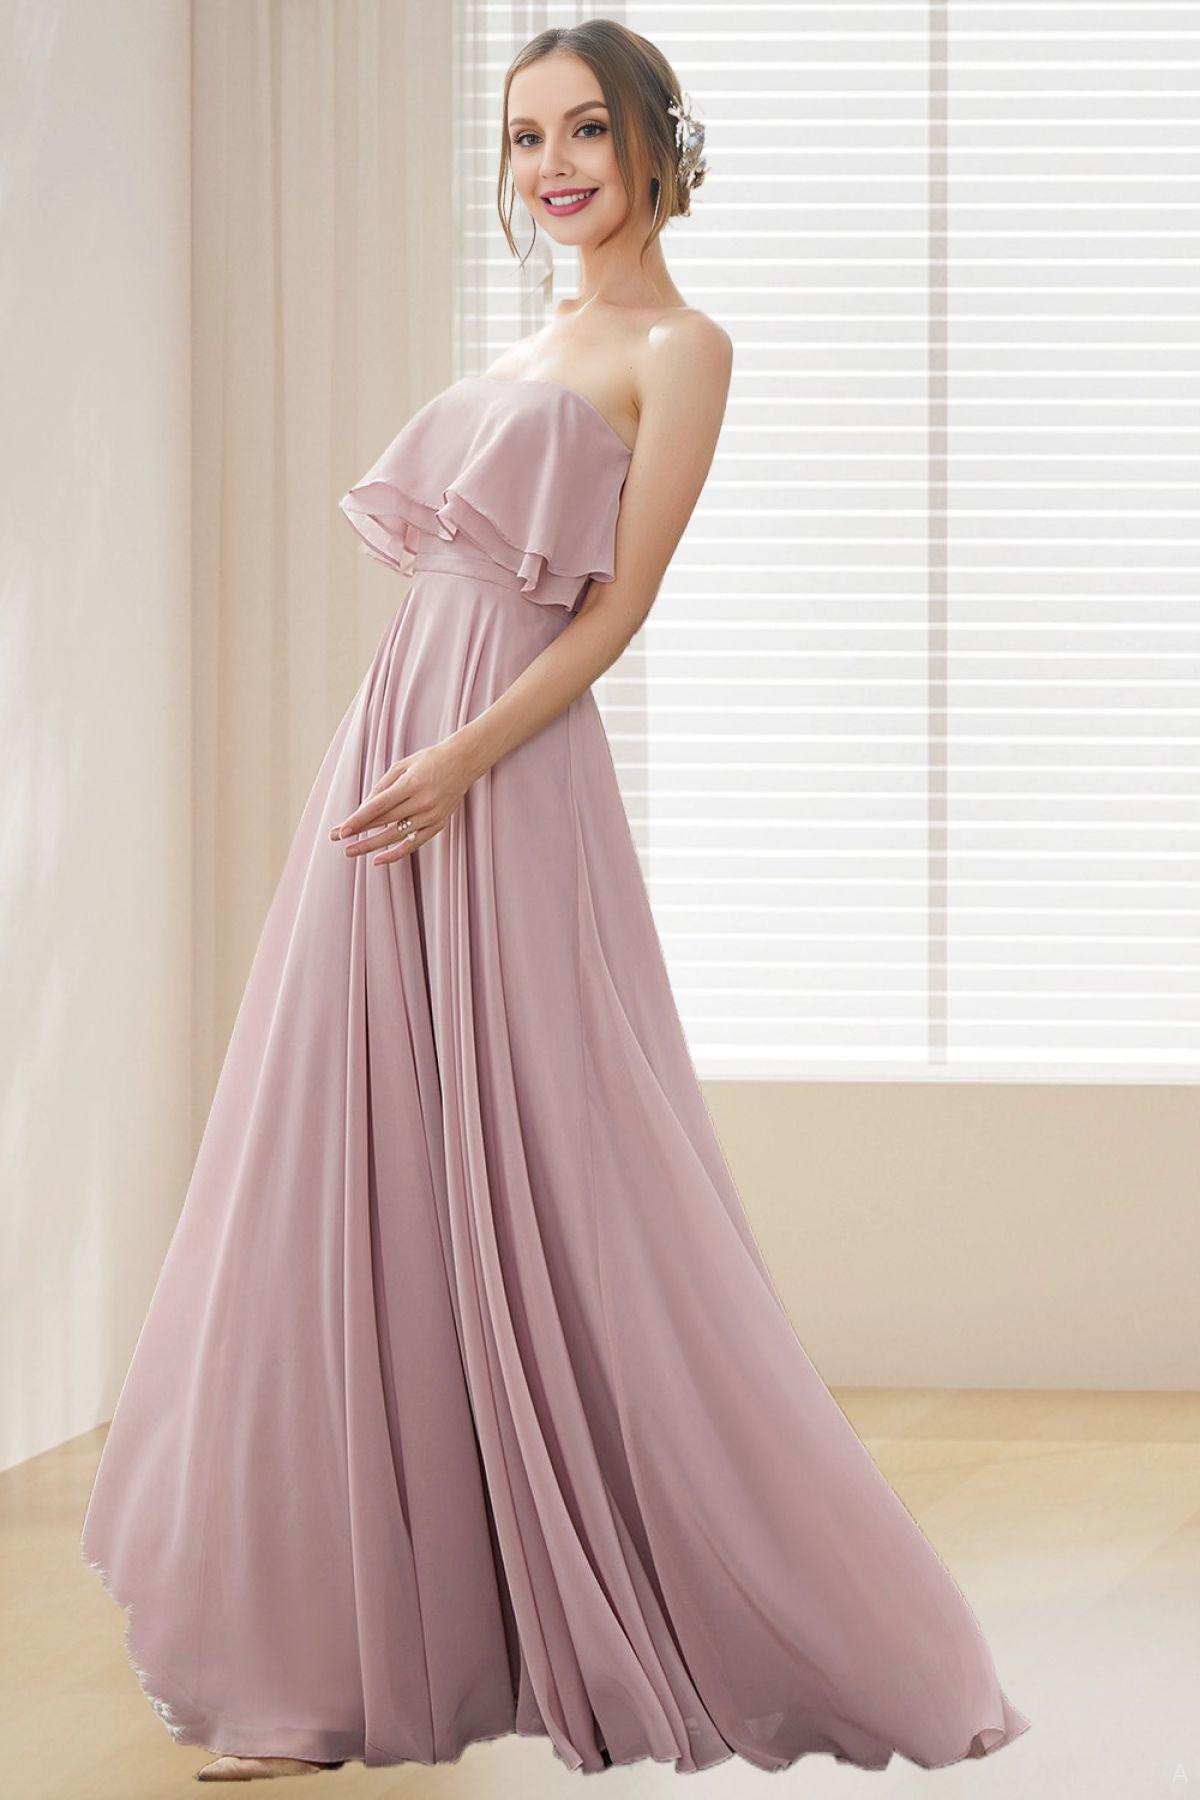 Dressime Strapless Bridesmaid Dresses A Line Ruched Bodice Chiffon